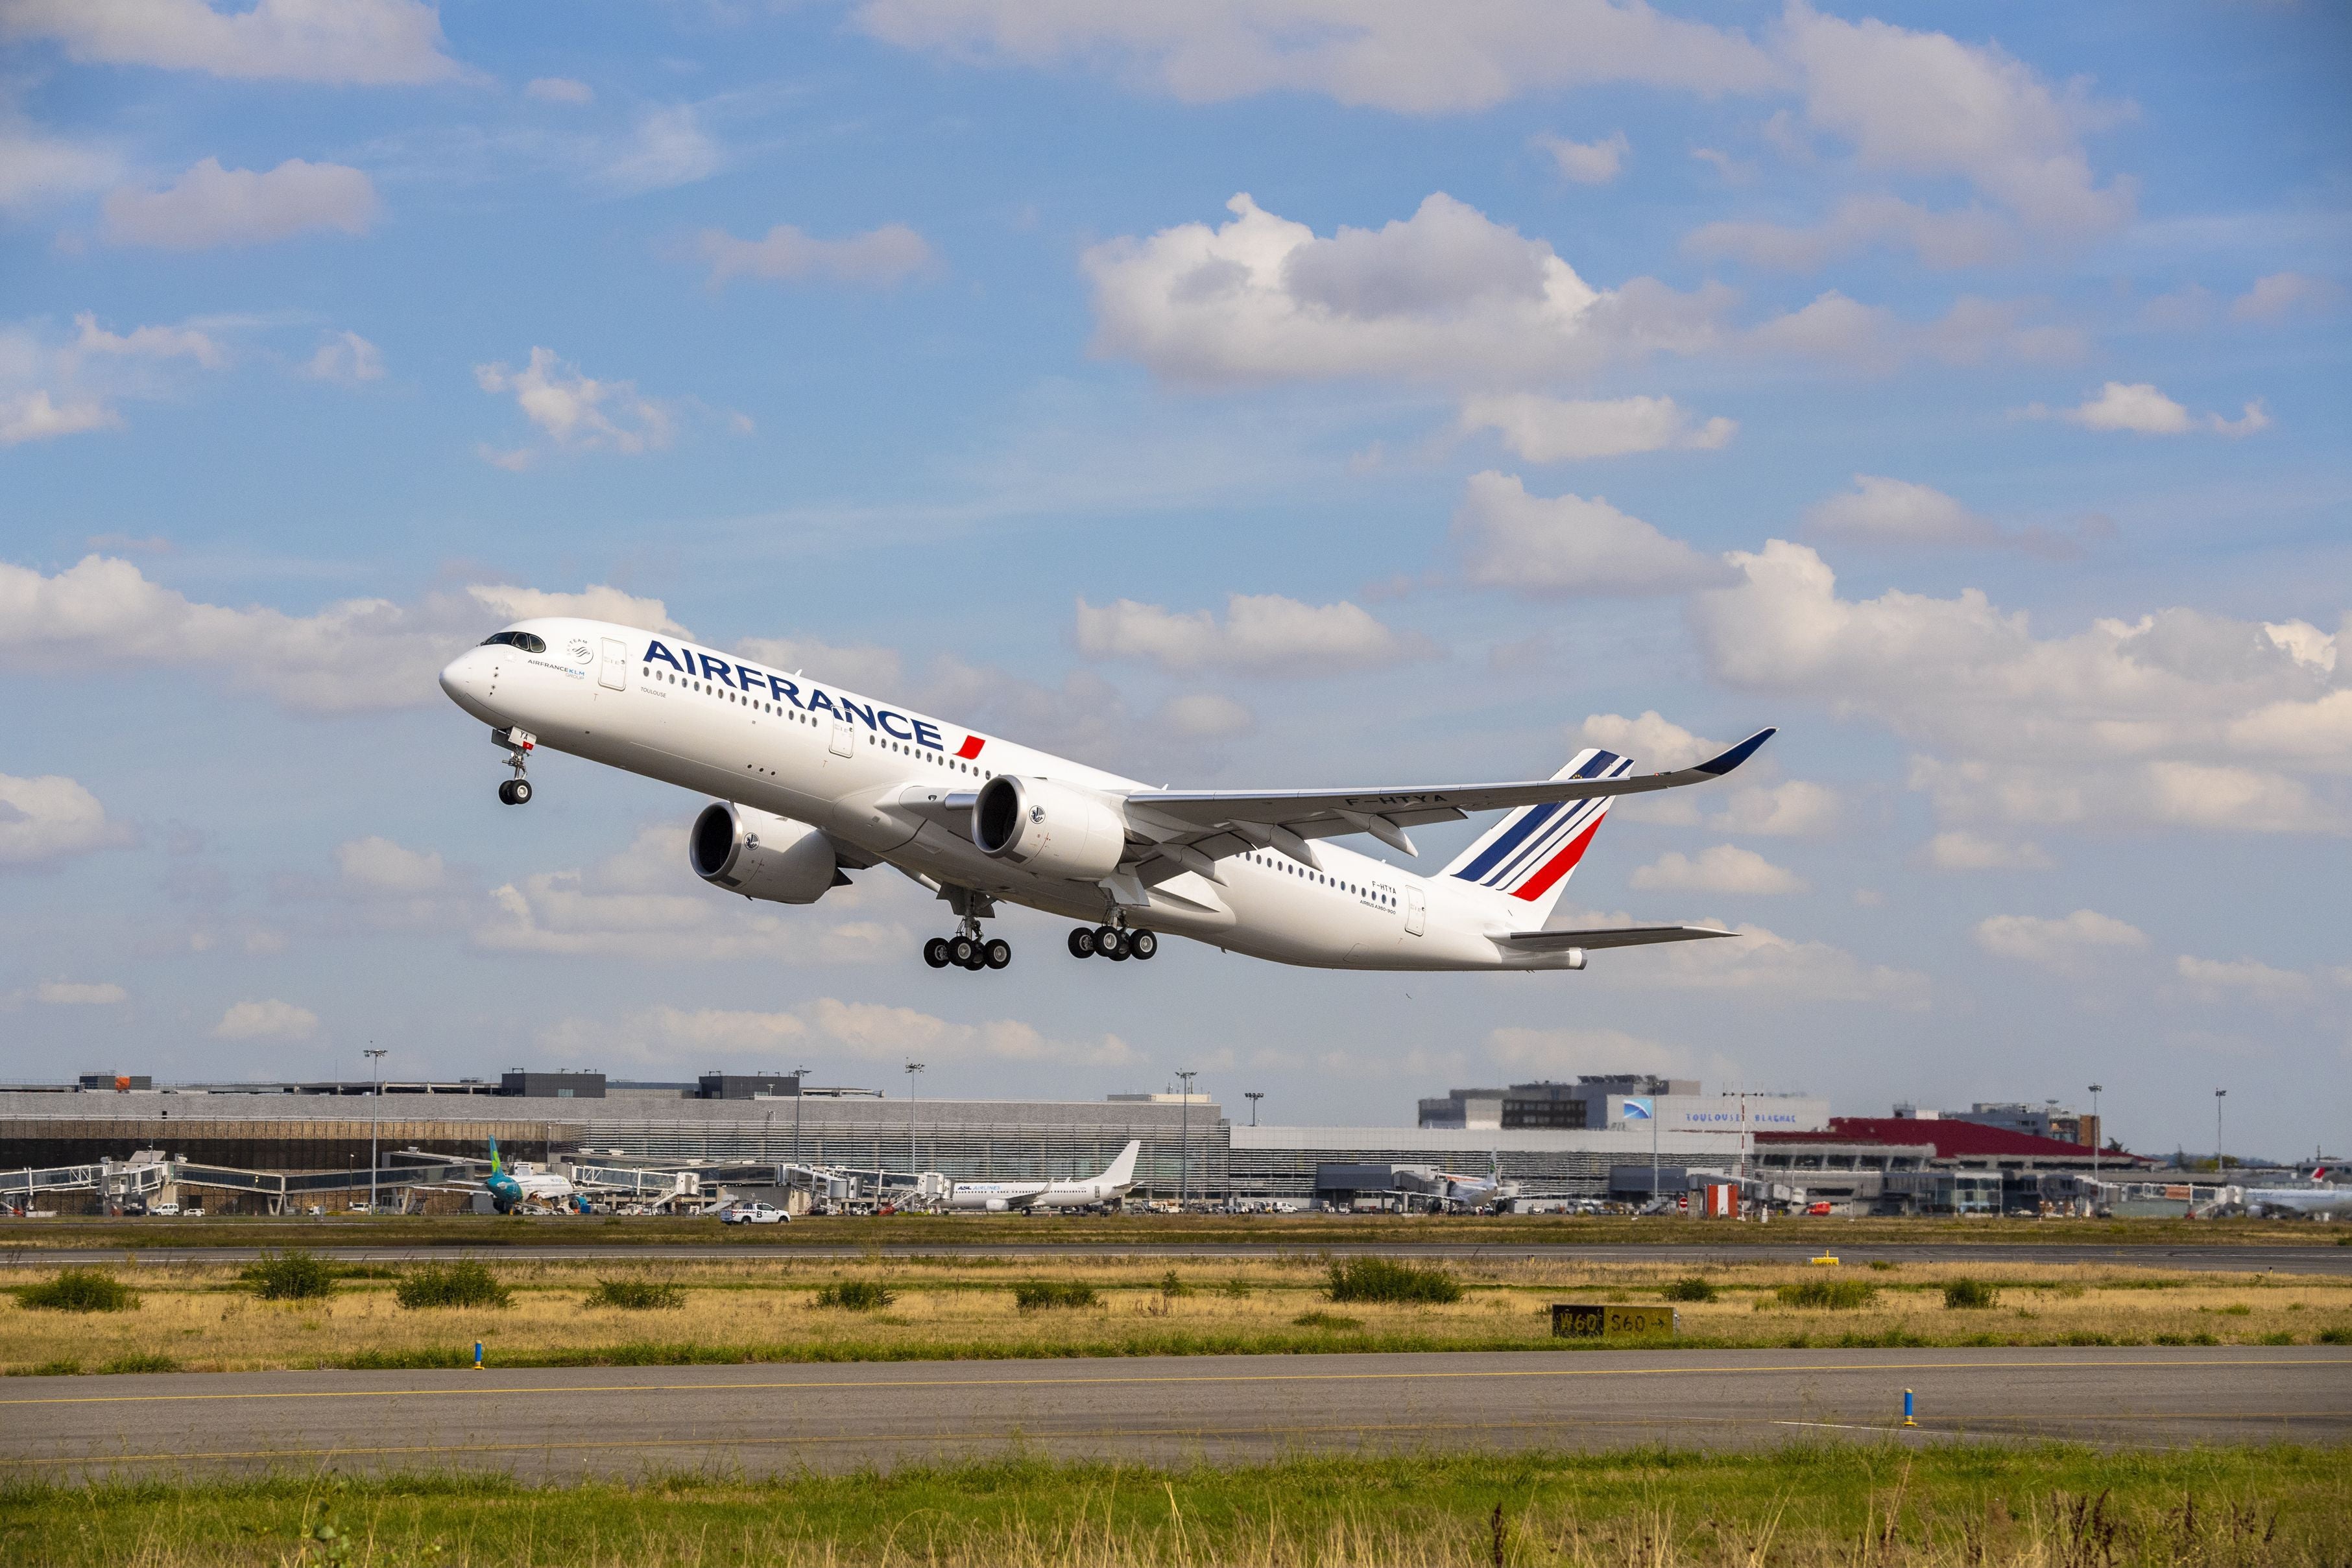 Takeoff of Air France A350-900